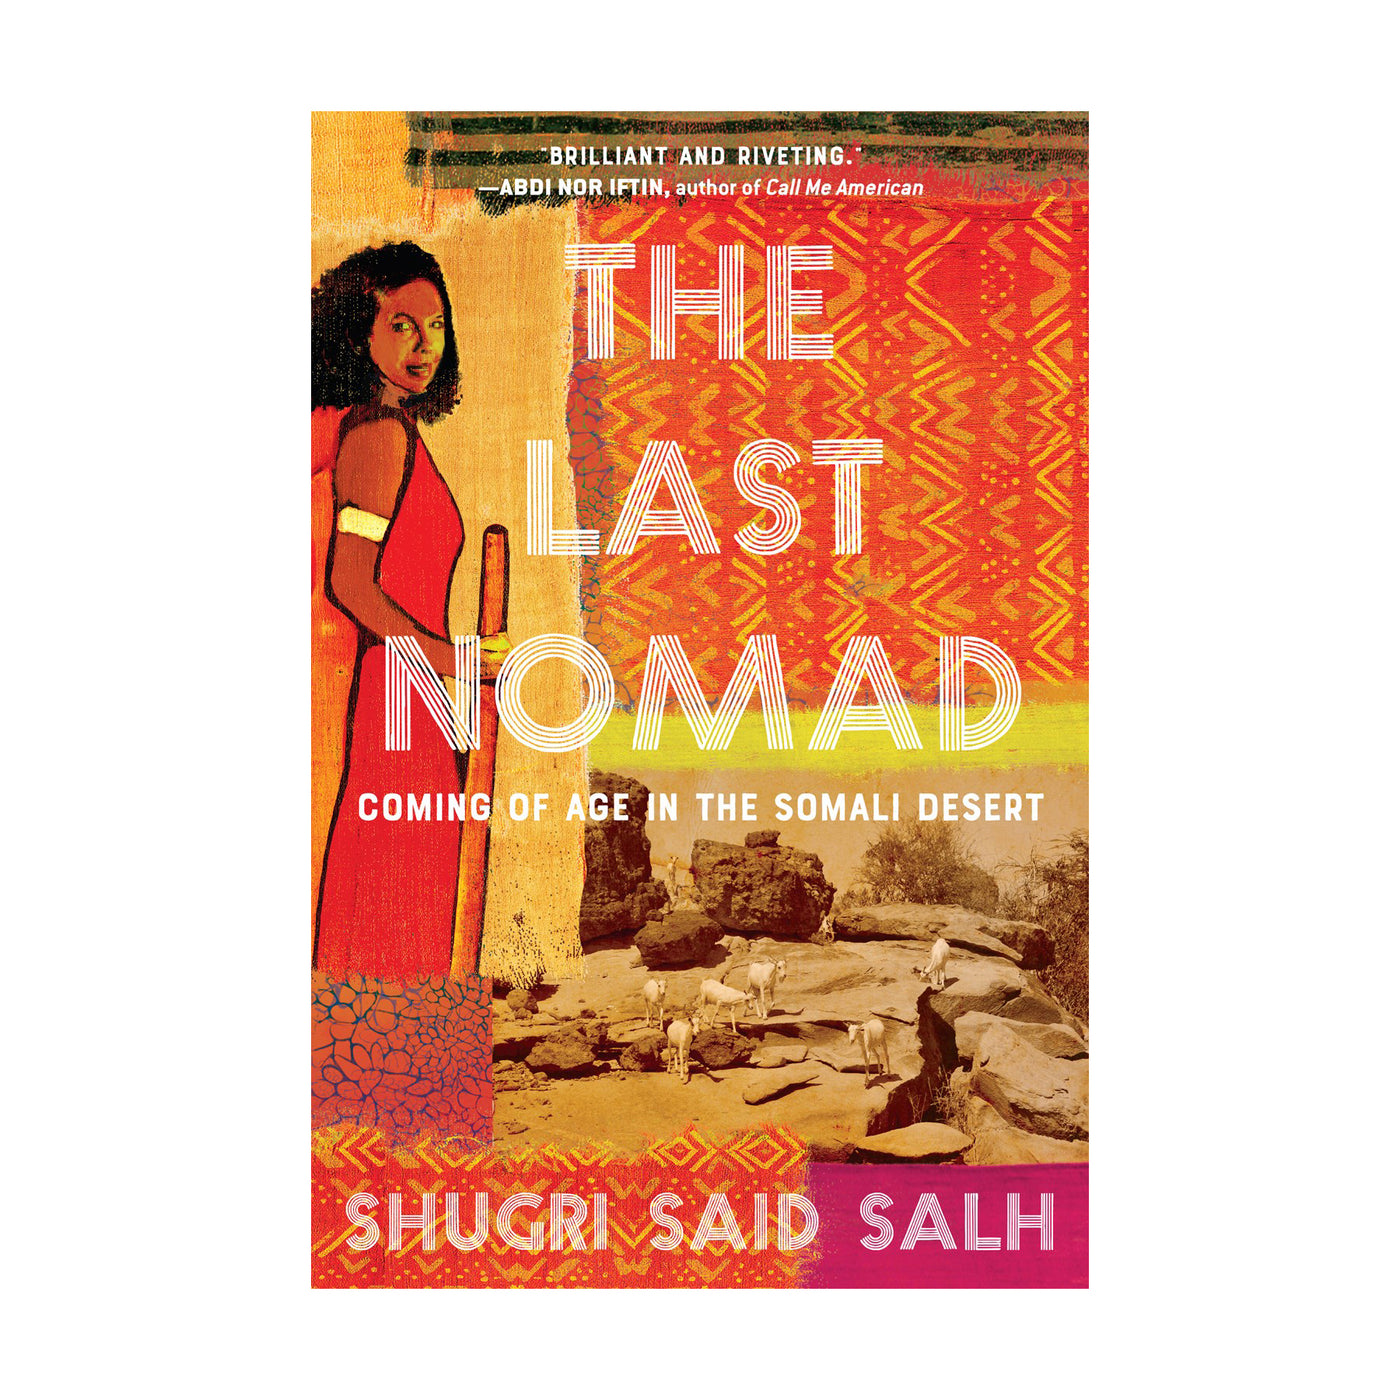 The Last Nomad